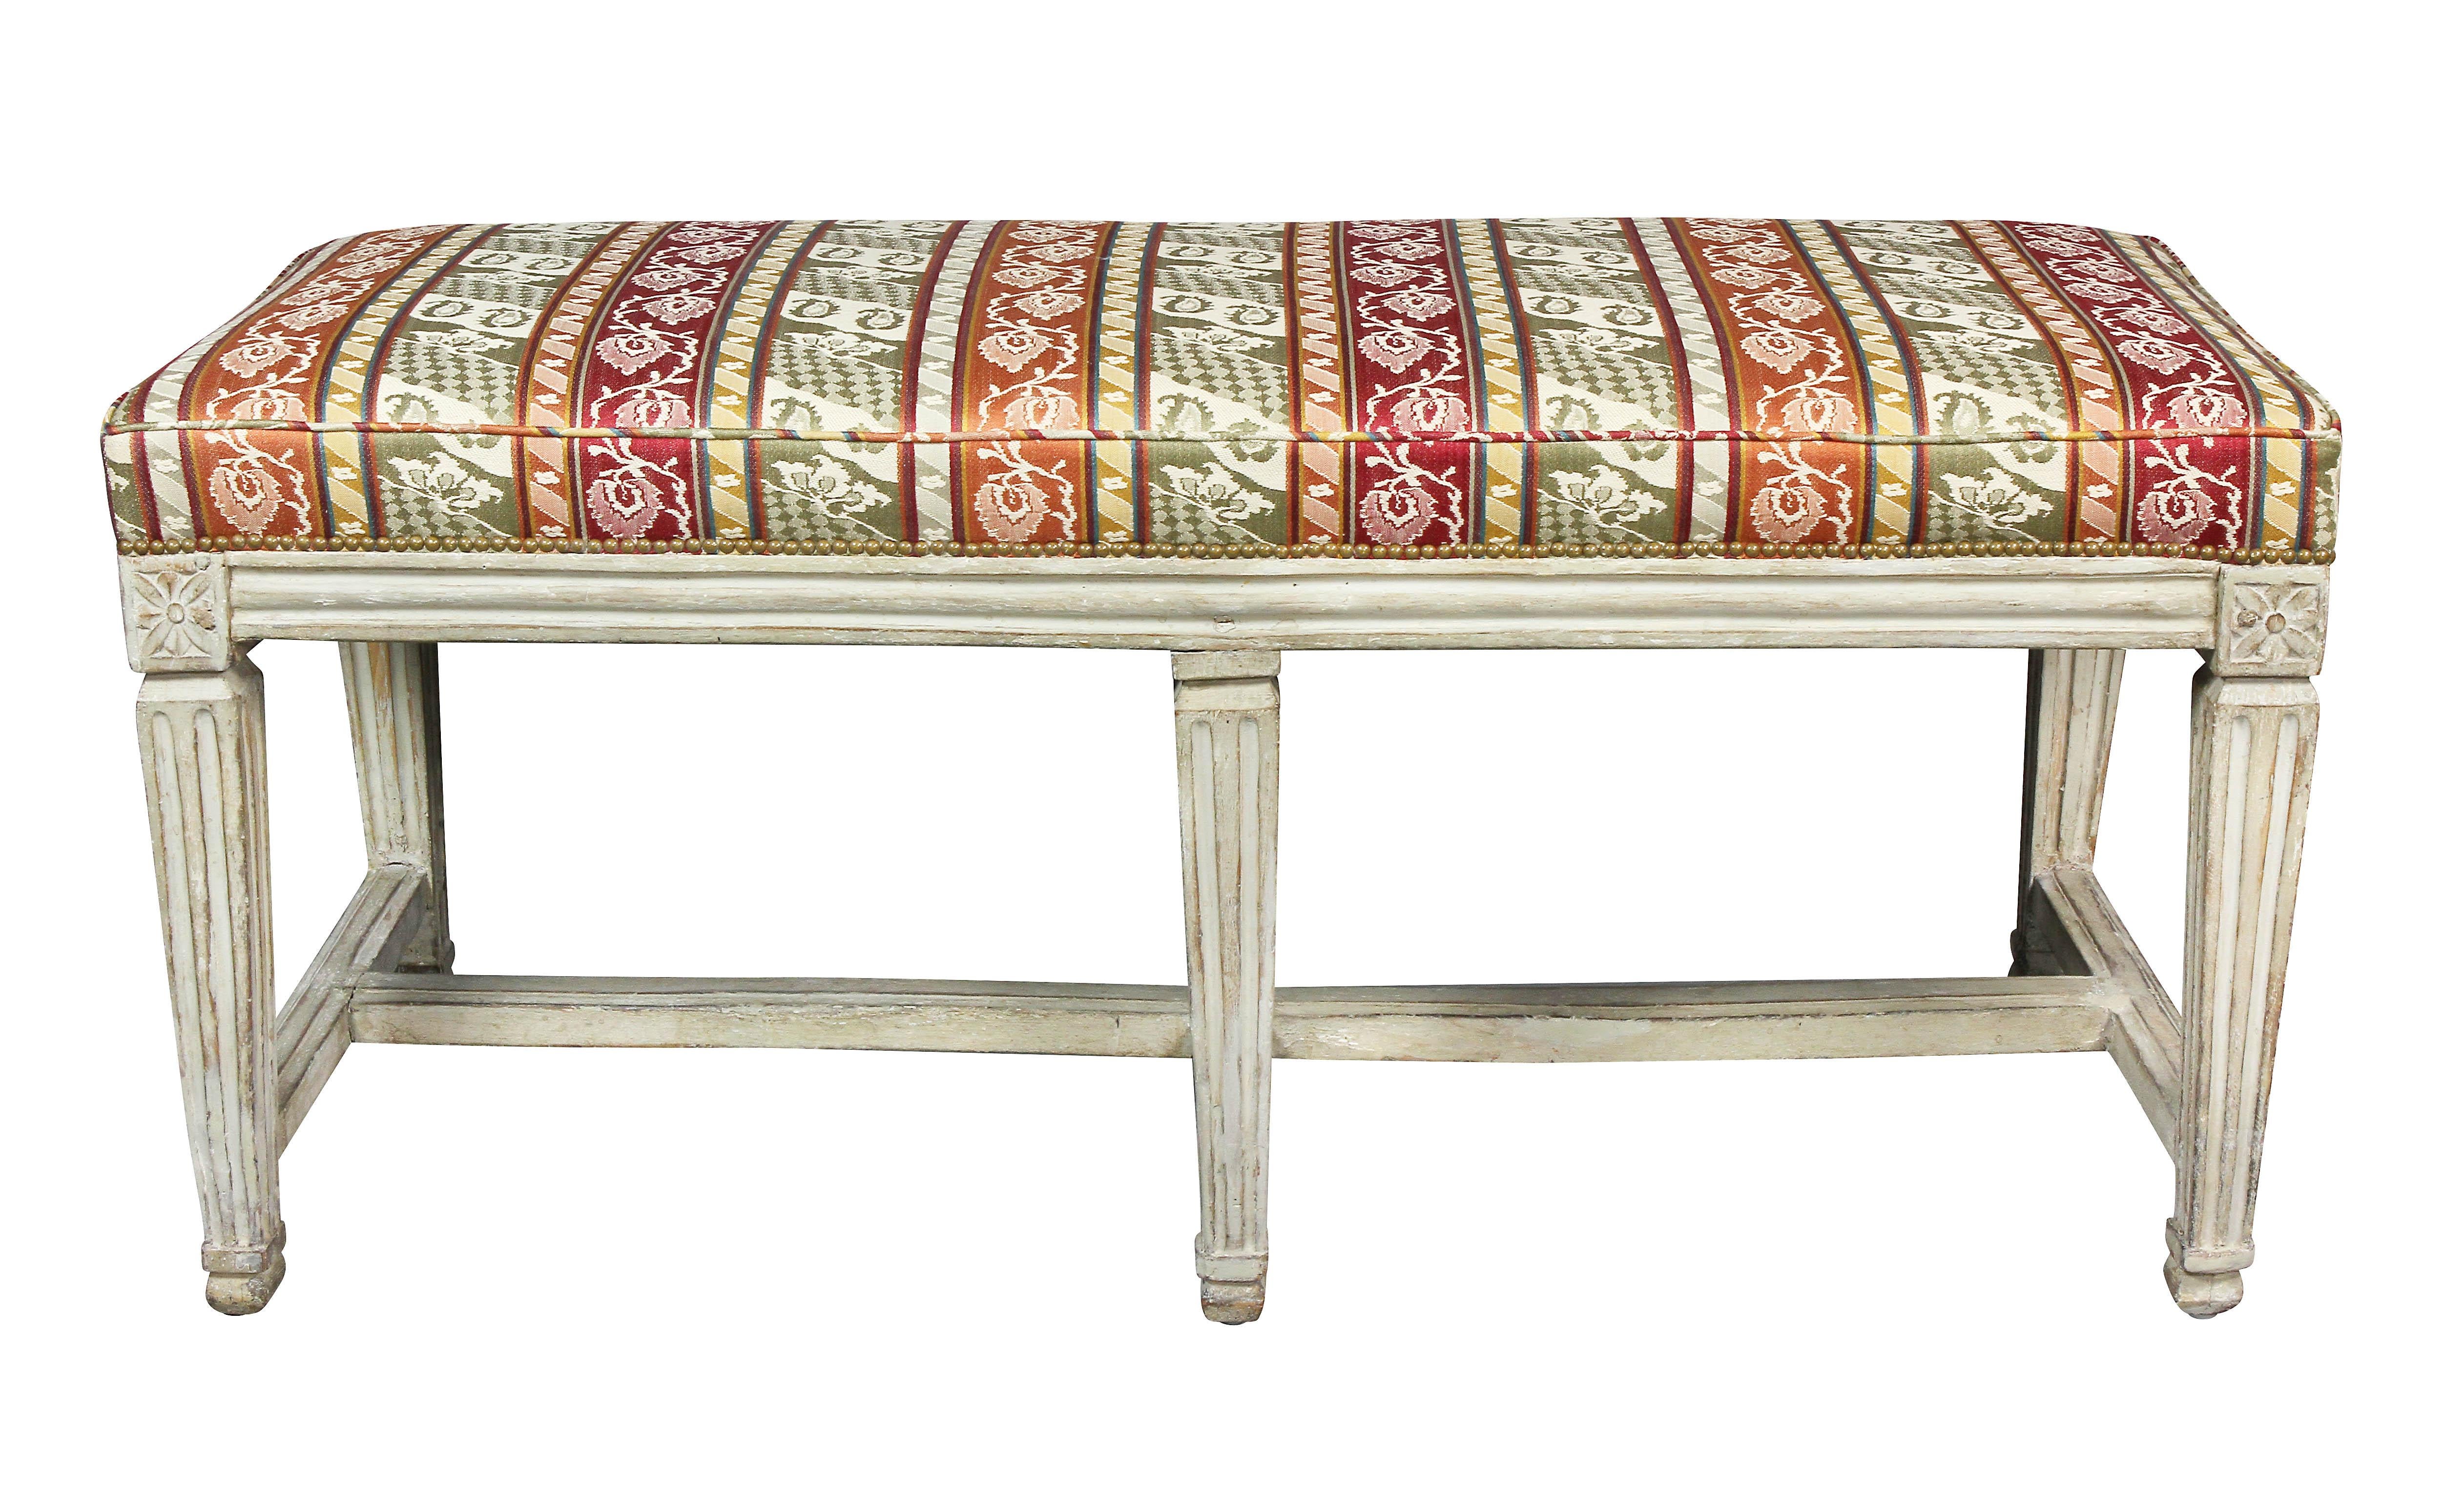 With rectangular upholstered seat over a frame with six tapered legs headed by paterae, joined by stretchers.